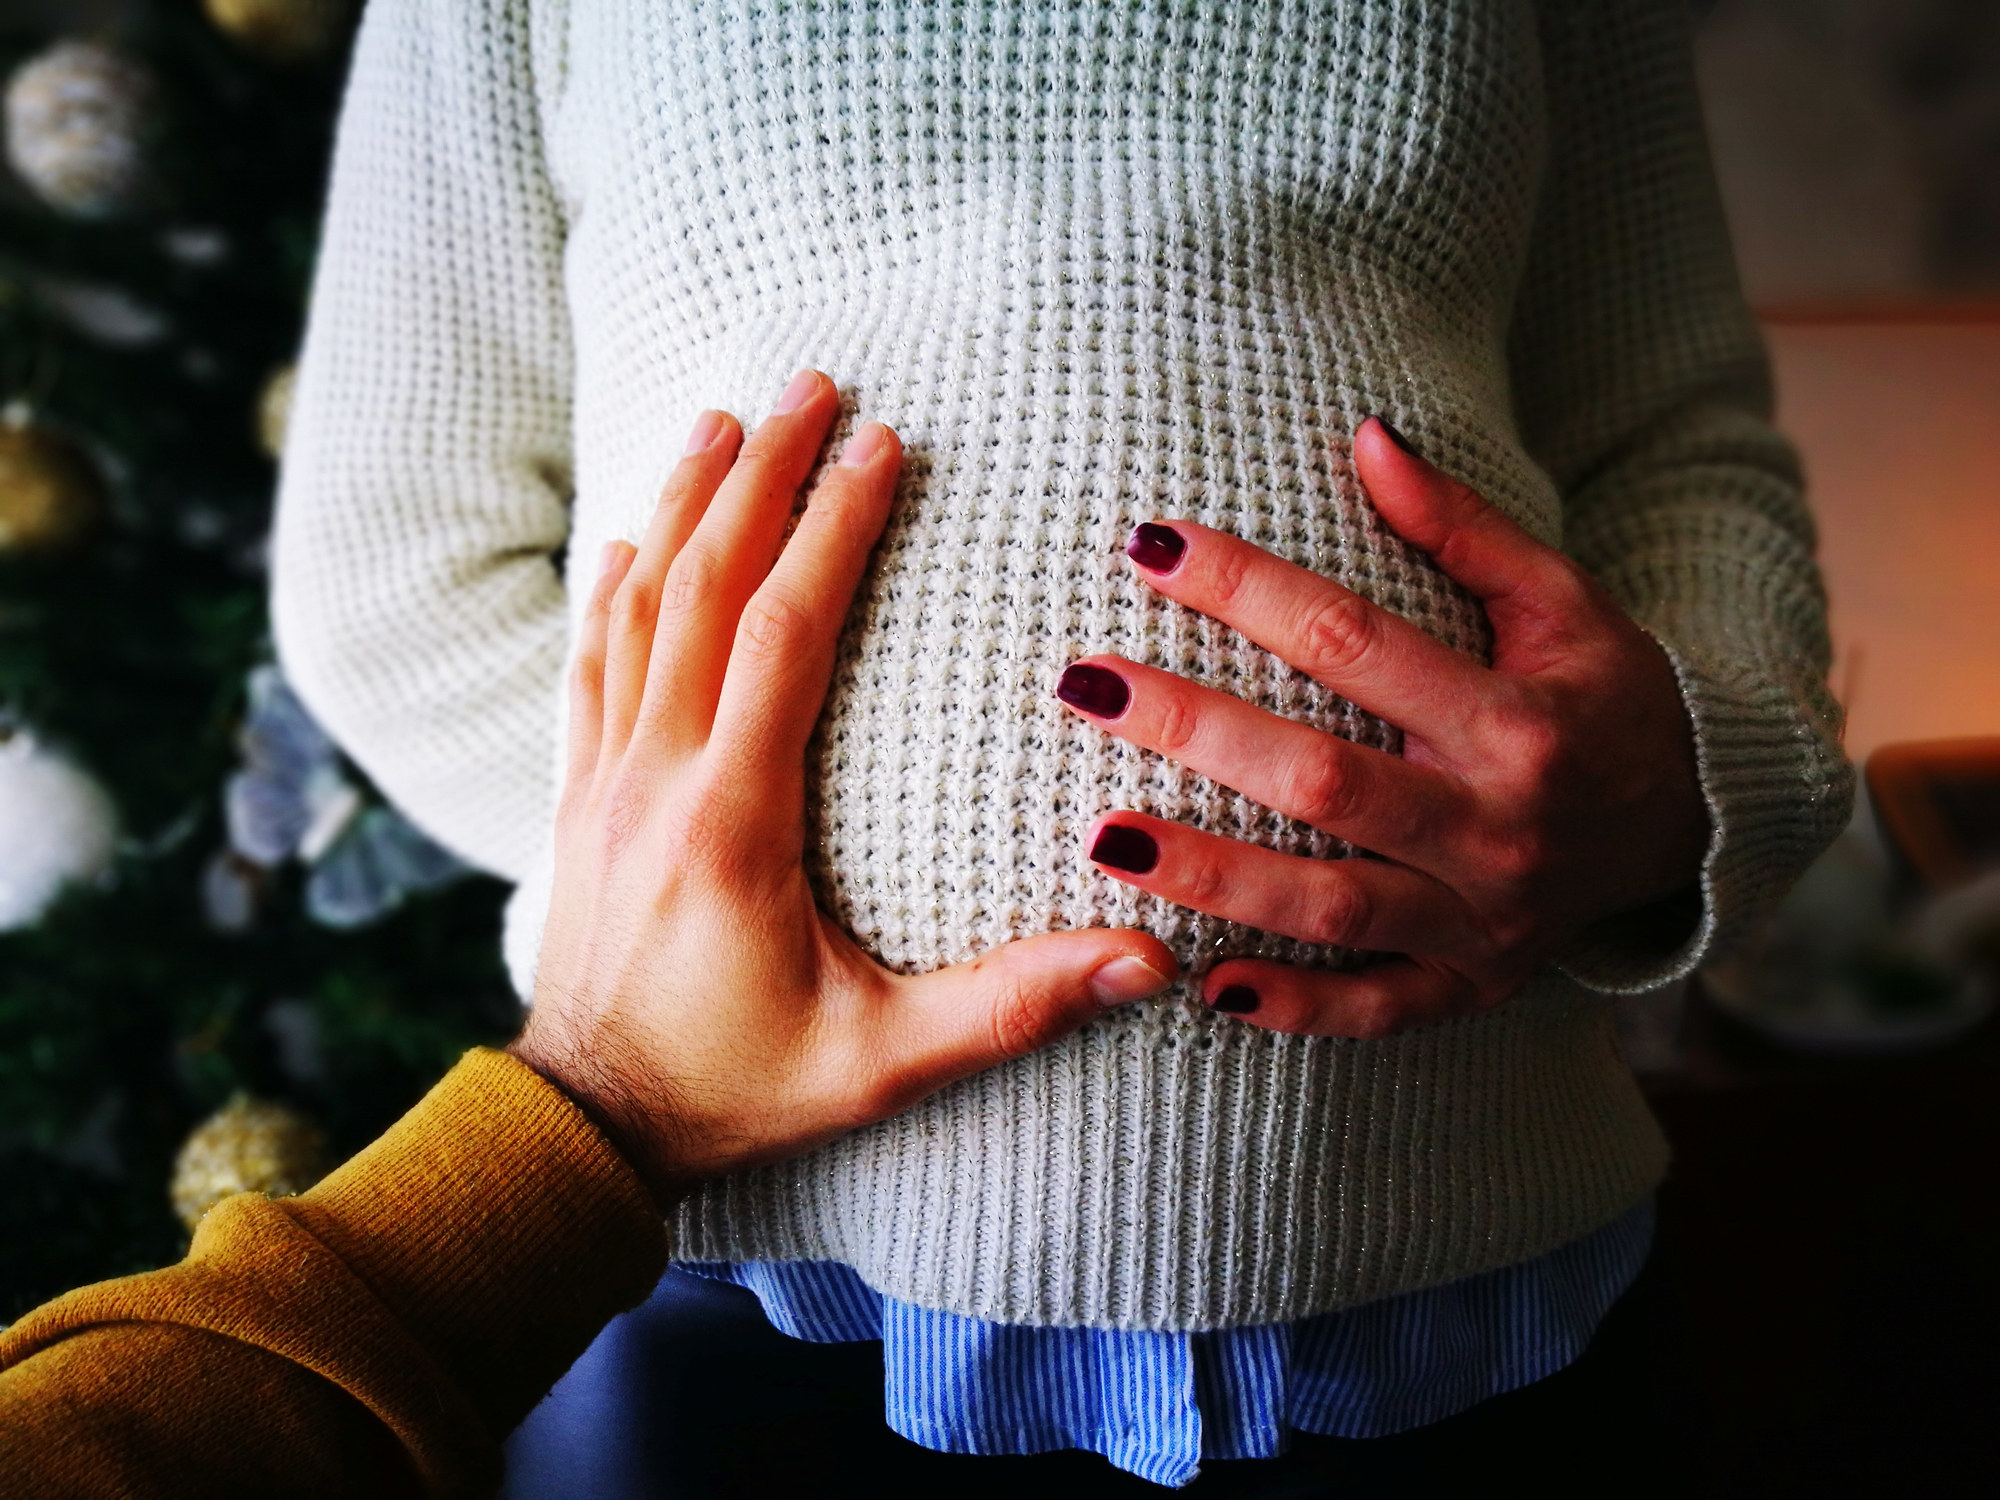 A hand cupping the belly of a pregnant person wearing a sweater